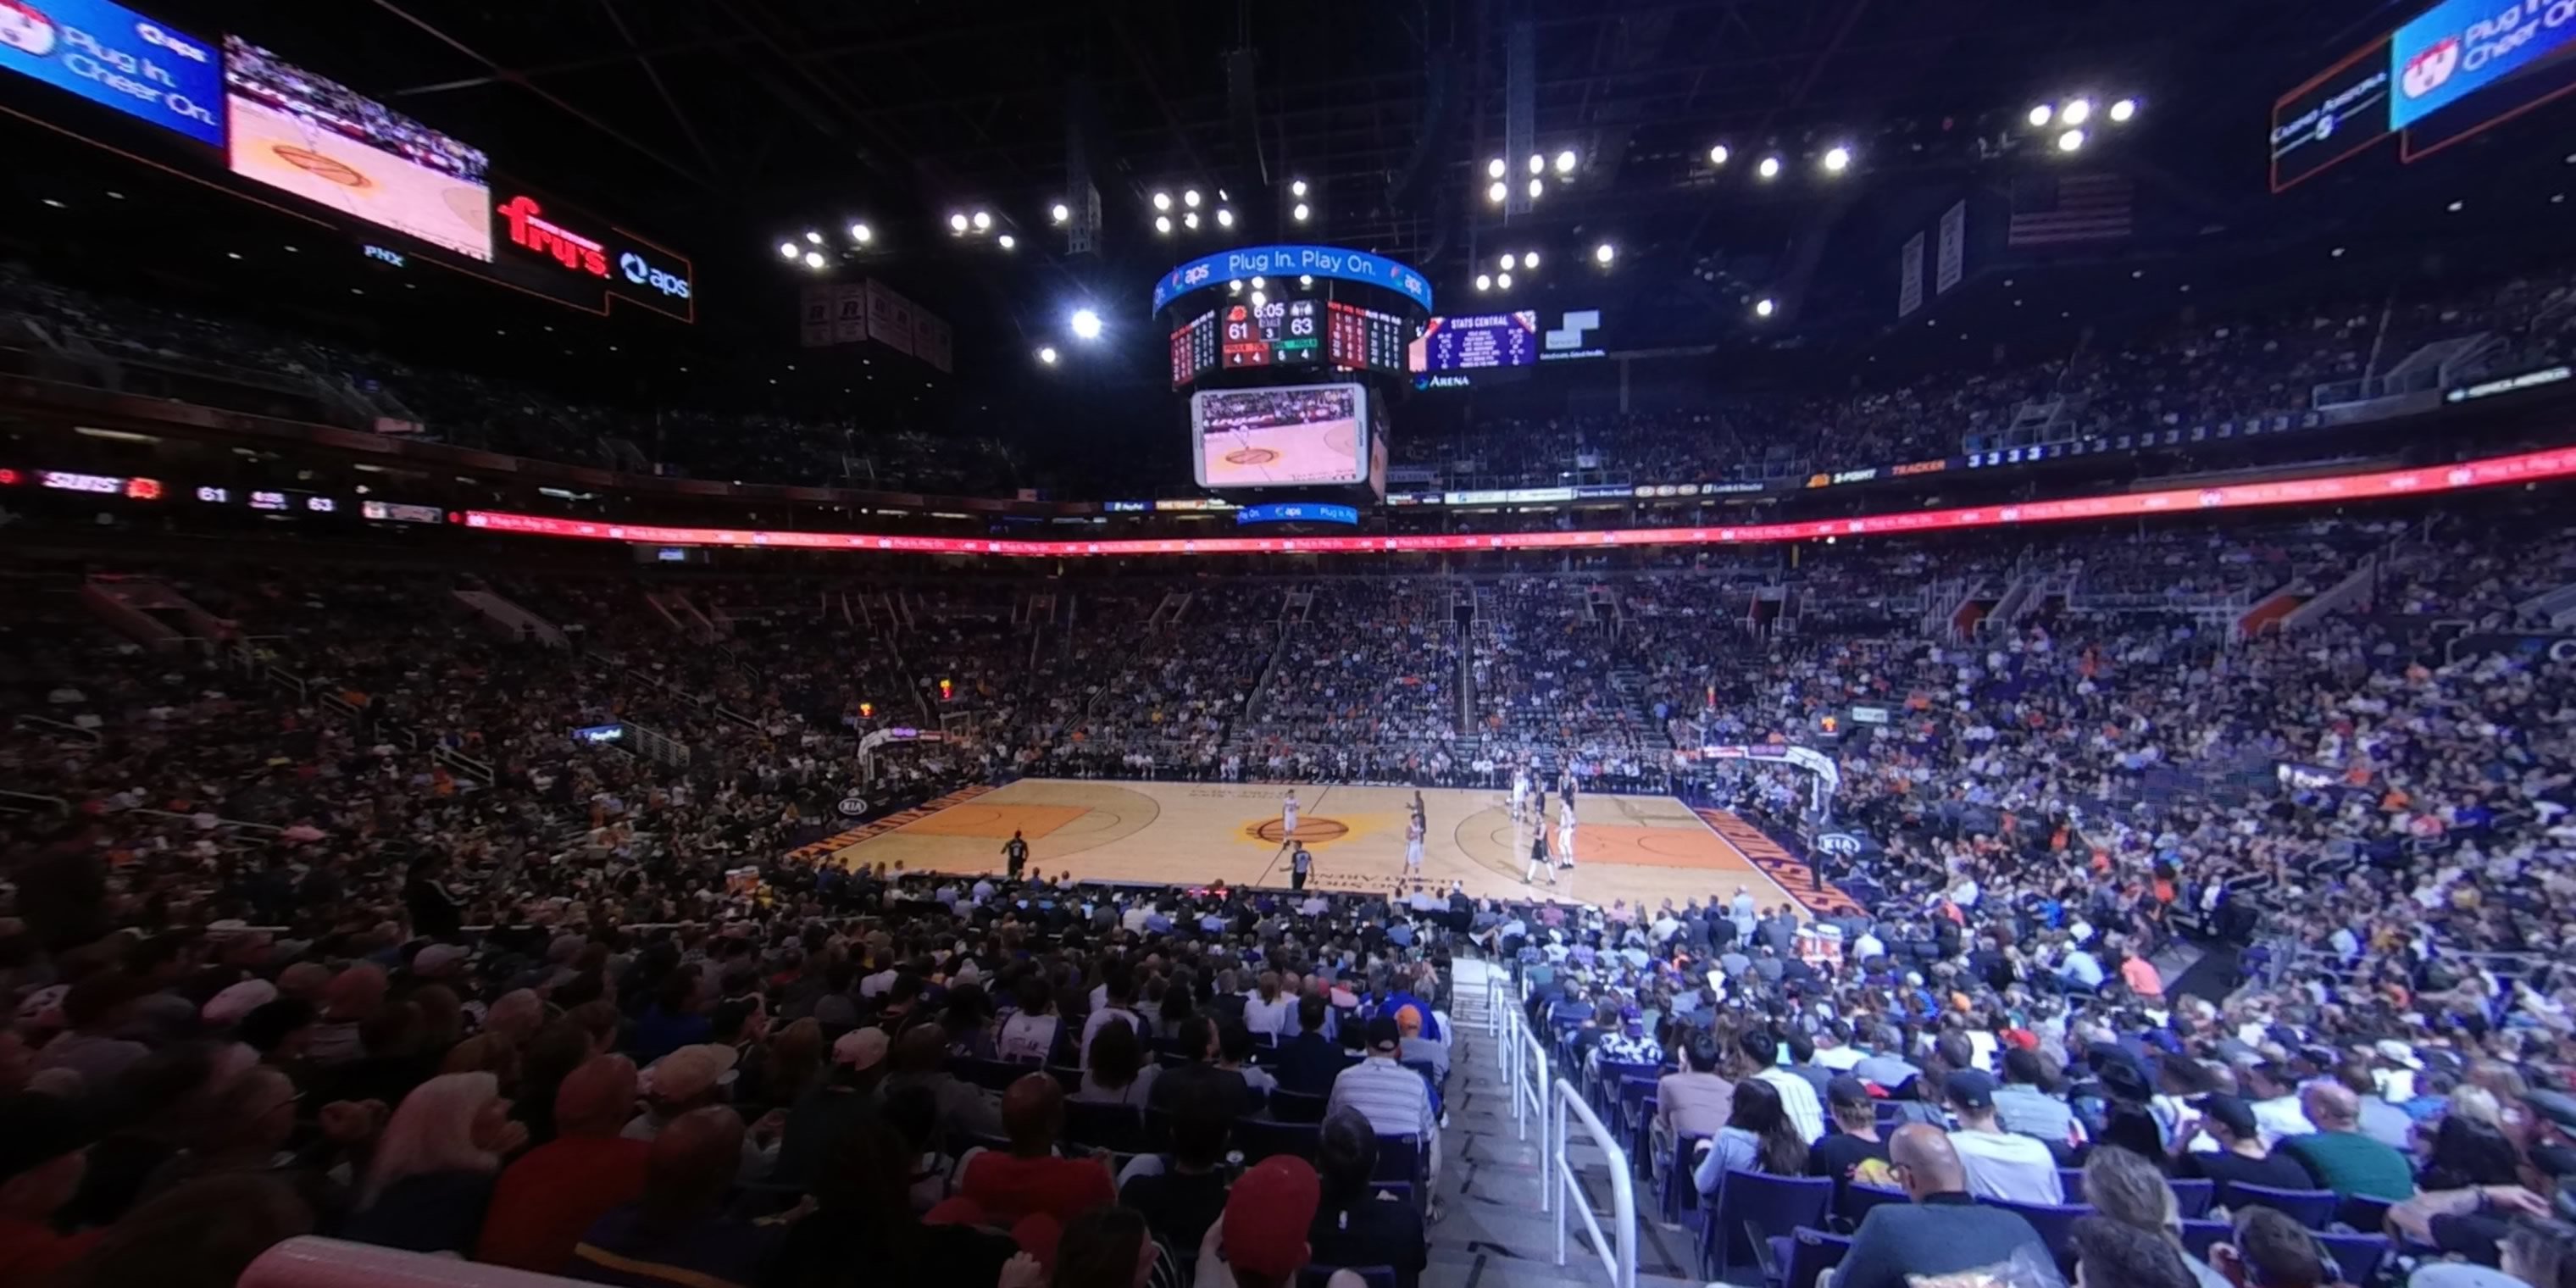 section 101 panoramic seat view  for basketball - footprint center